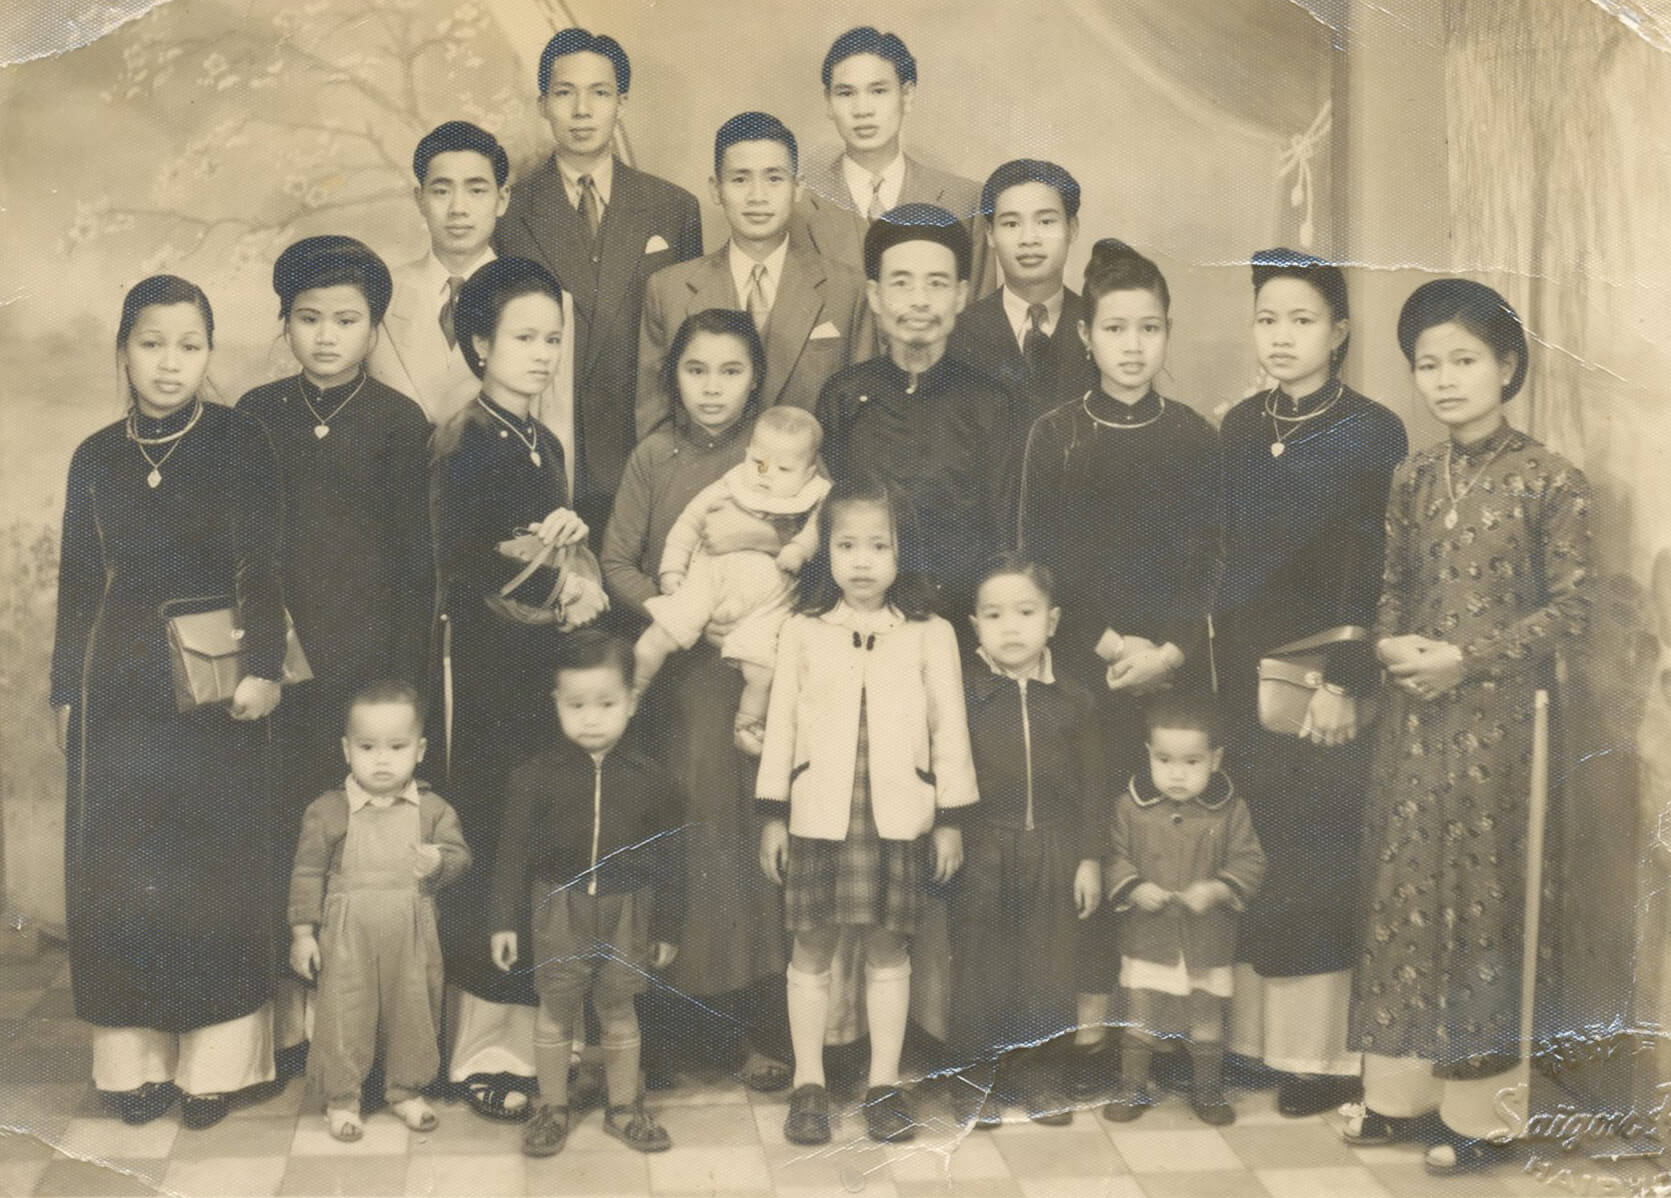 Black and white portrait of a large Vietnamese family.